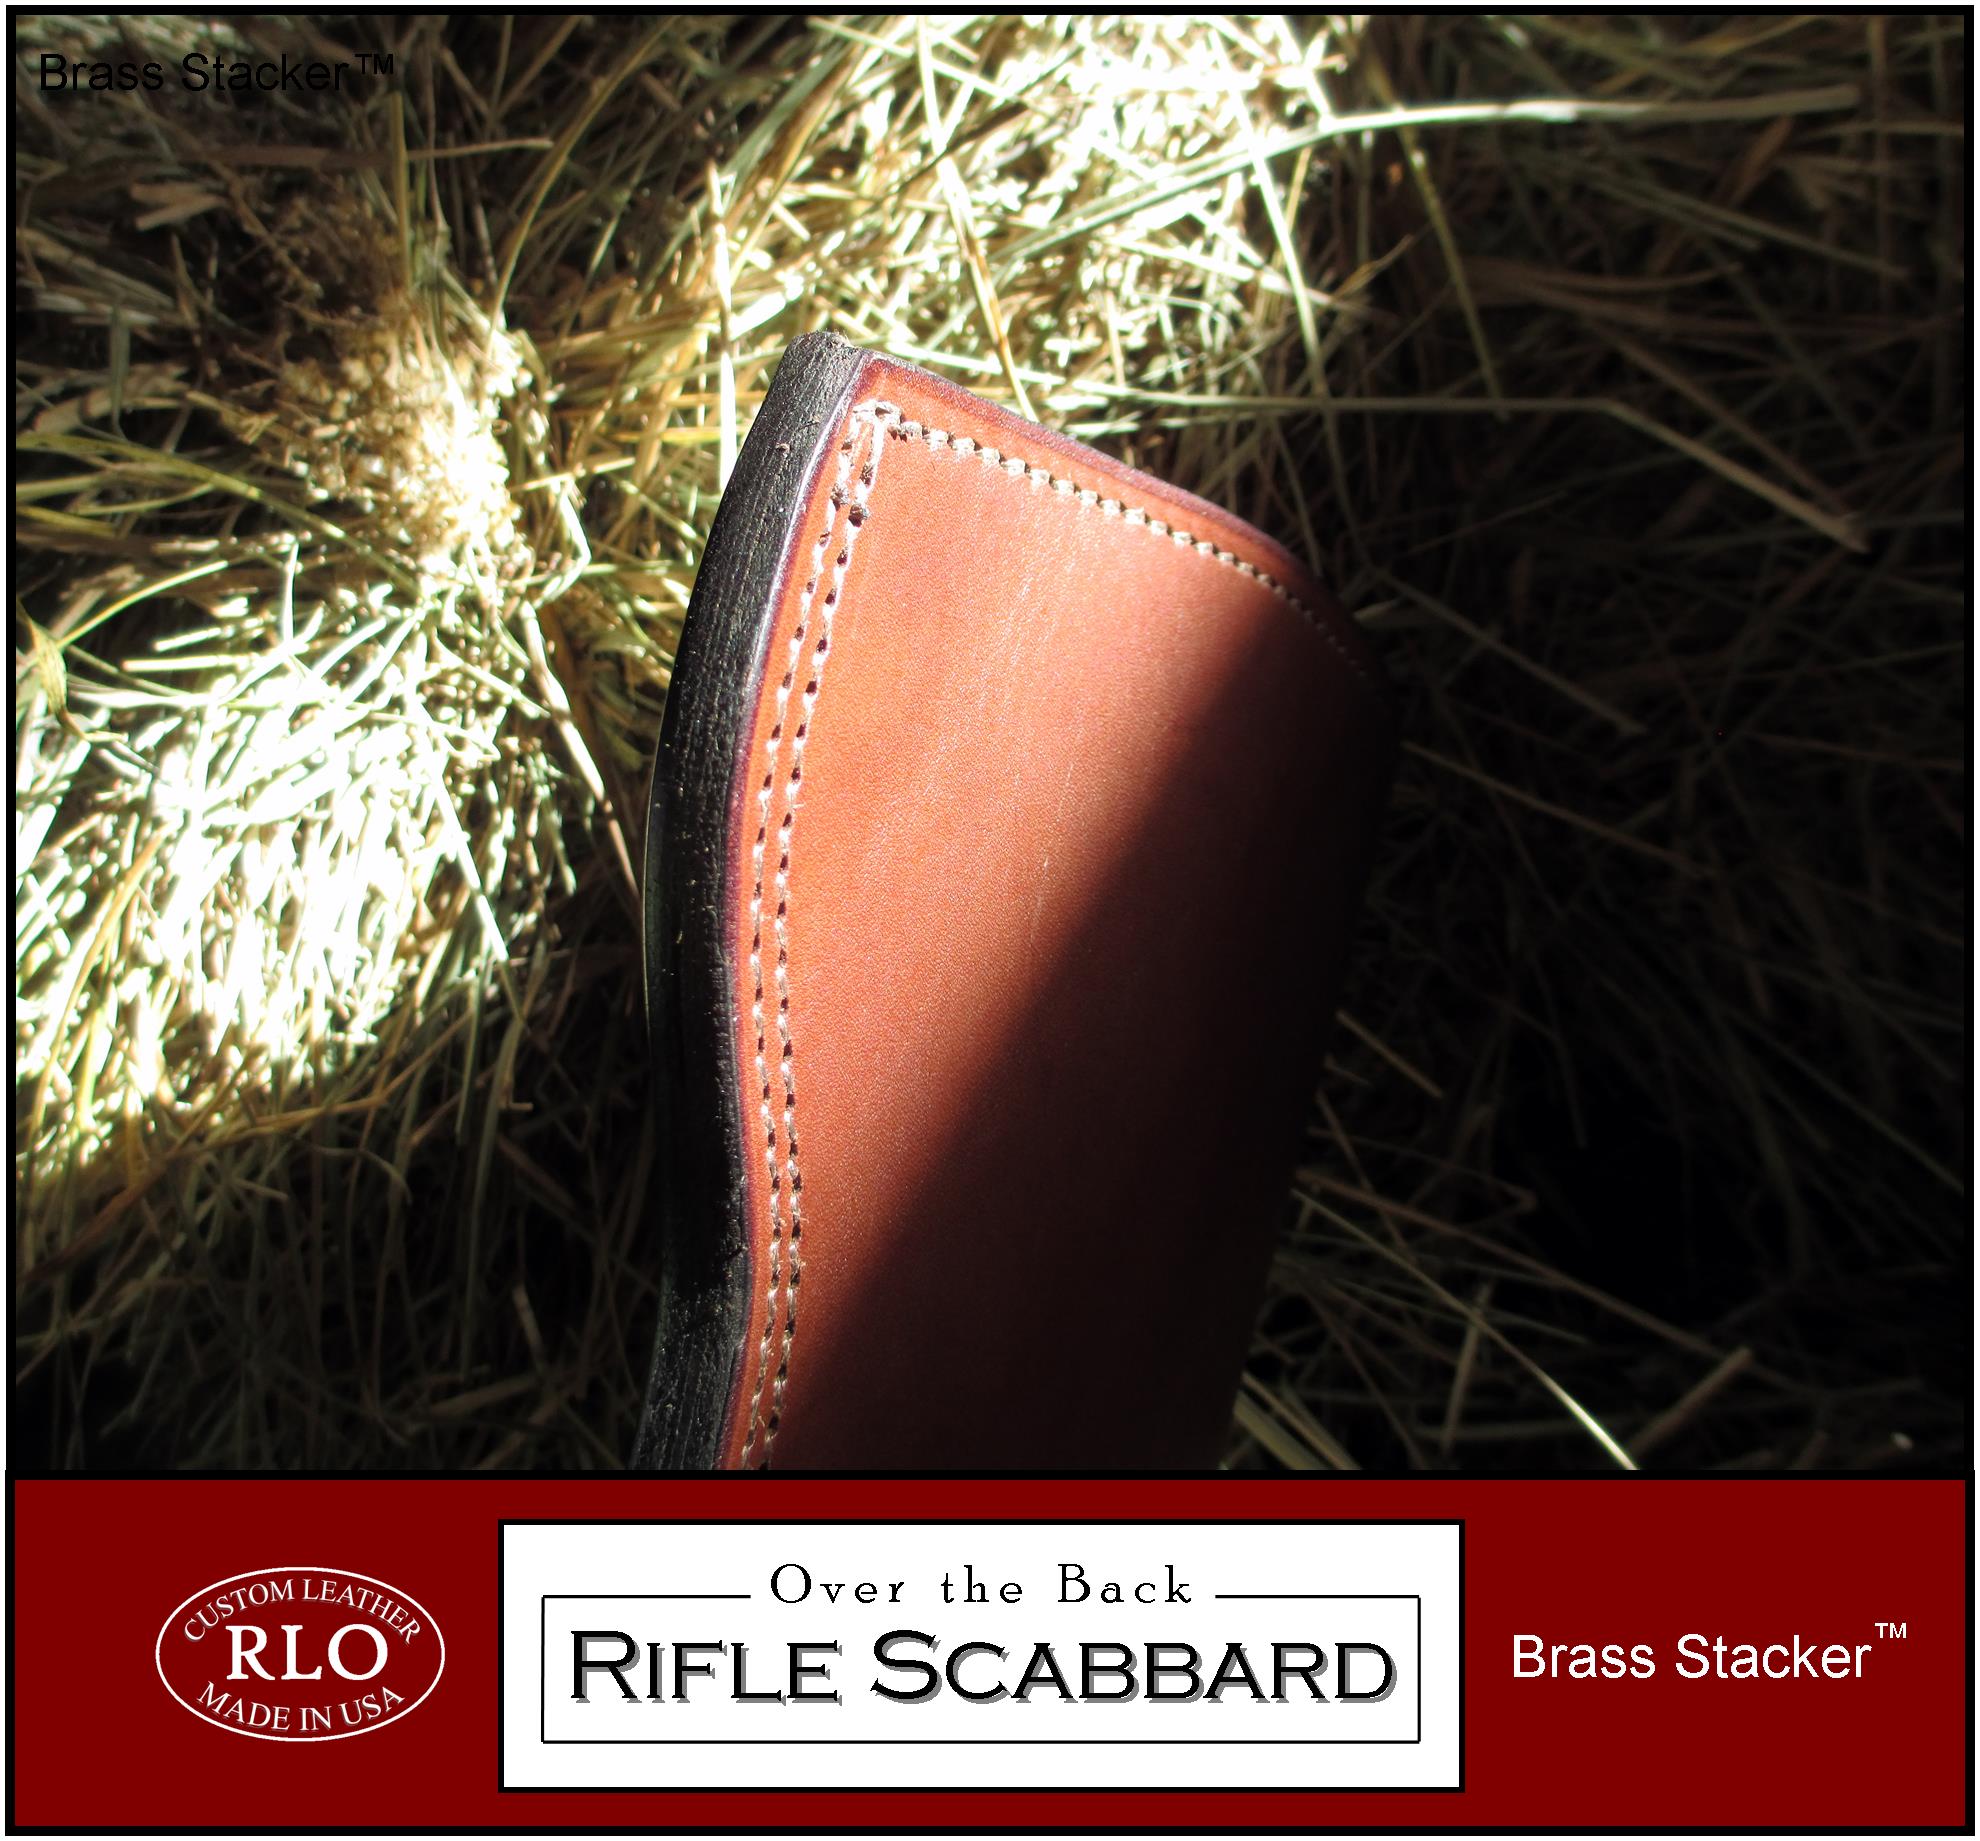 Brass Stacker™ RLO Over the Back Rifle Scabbard